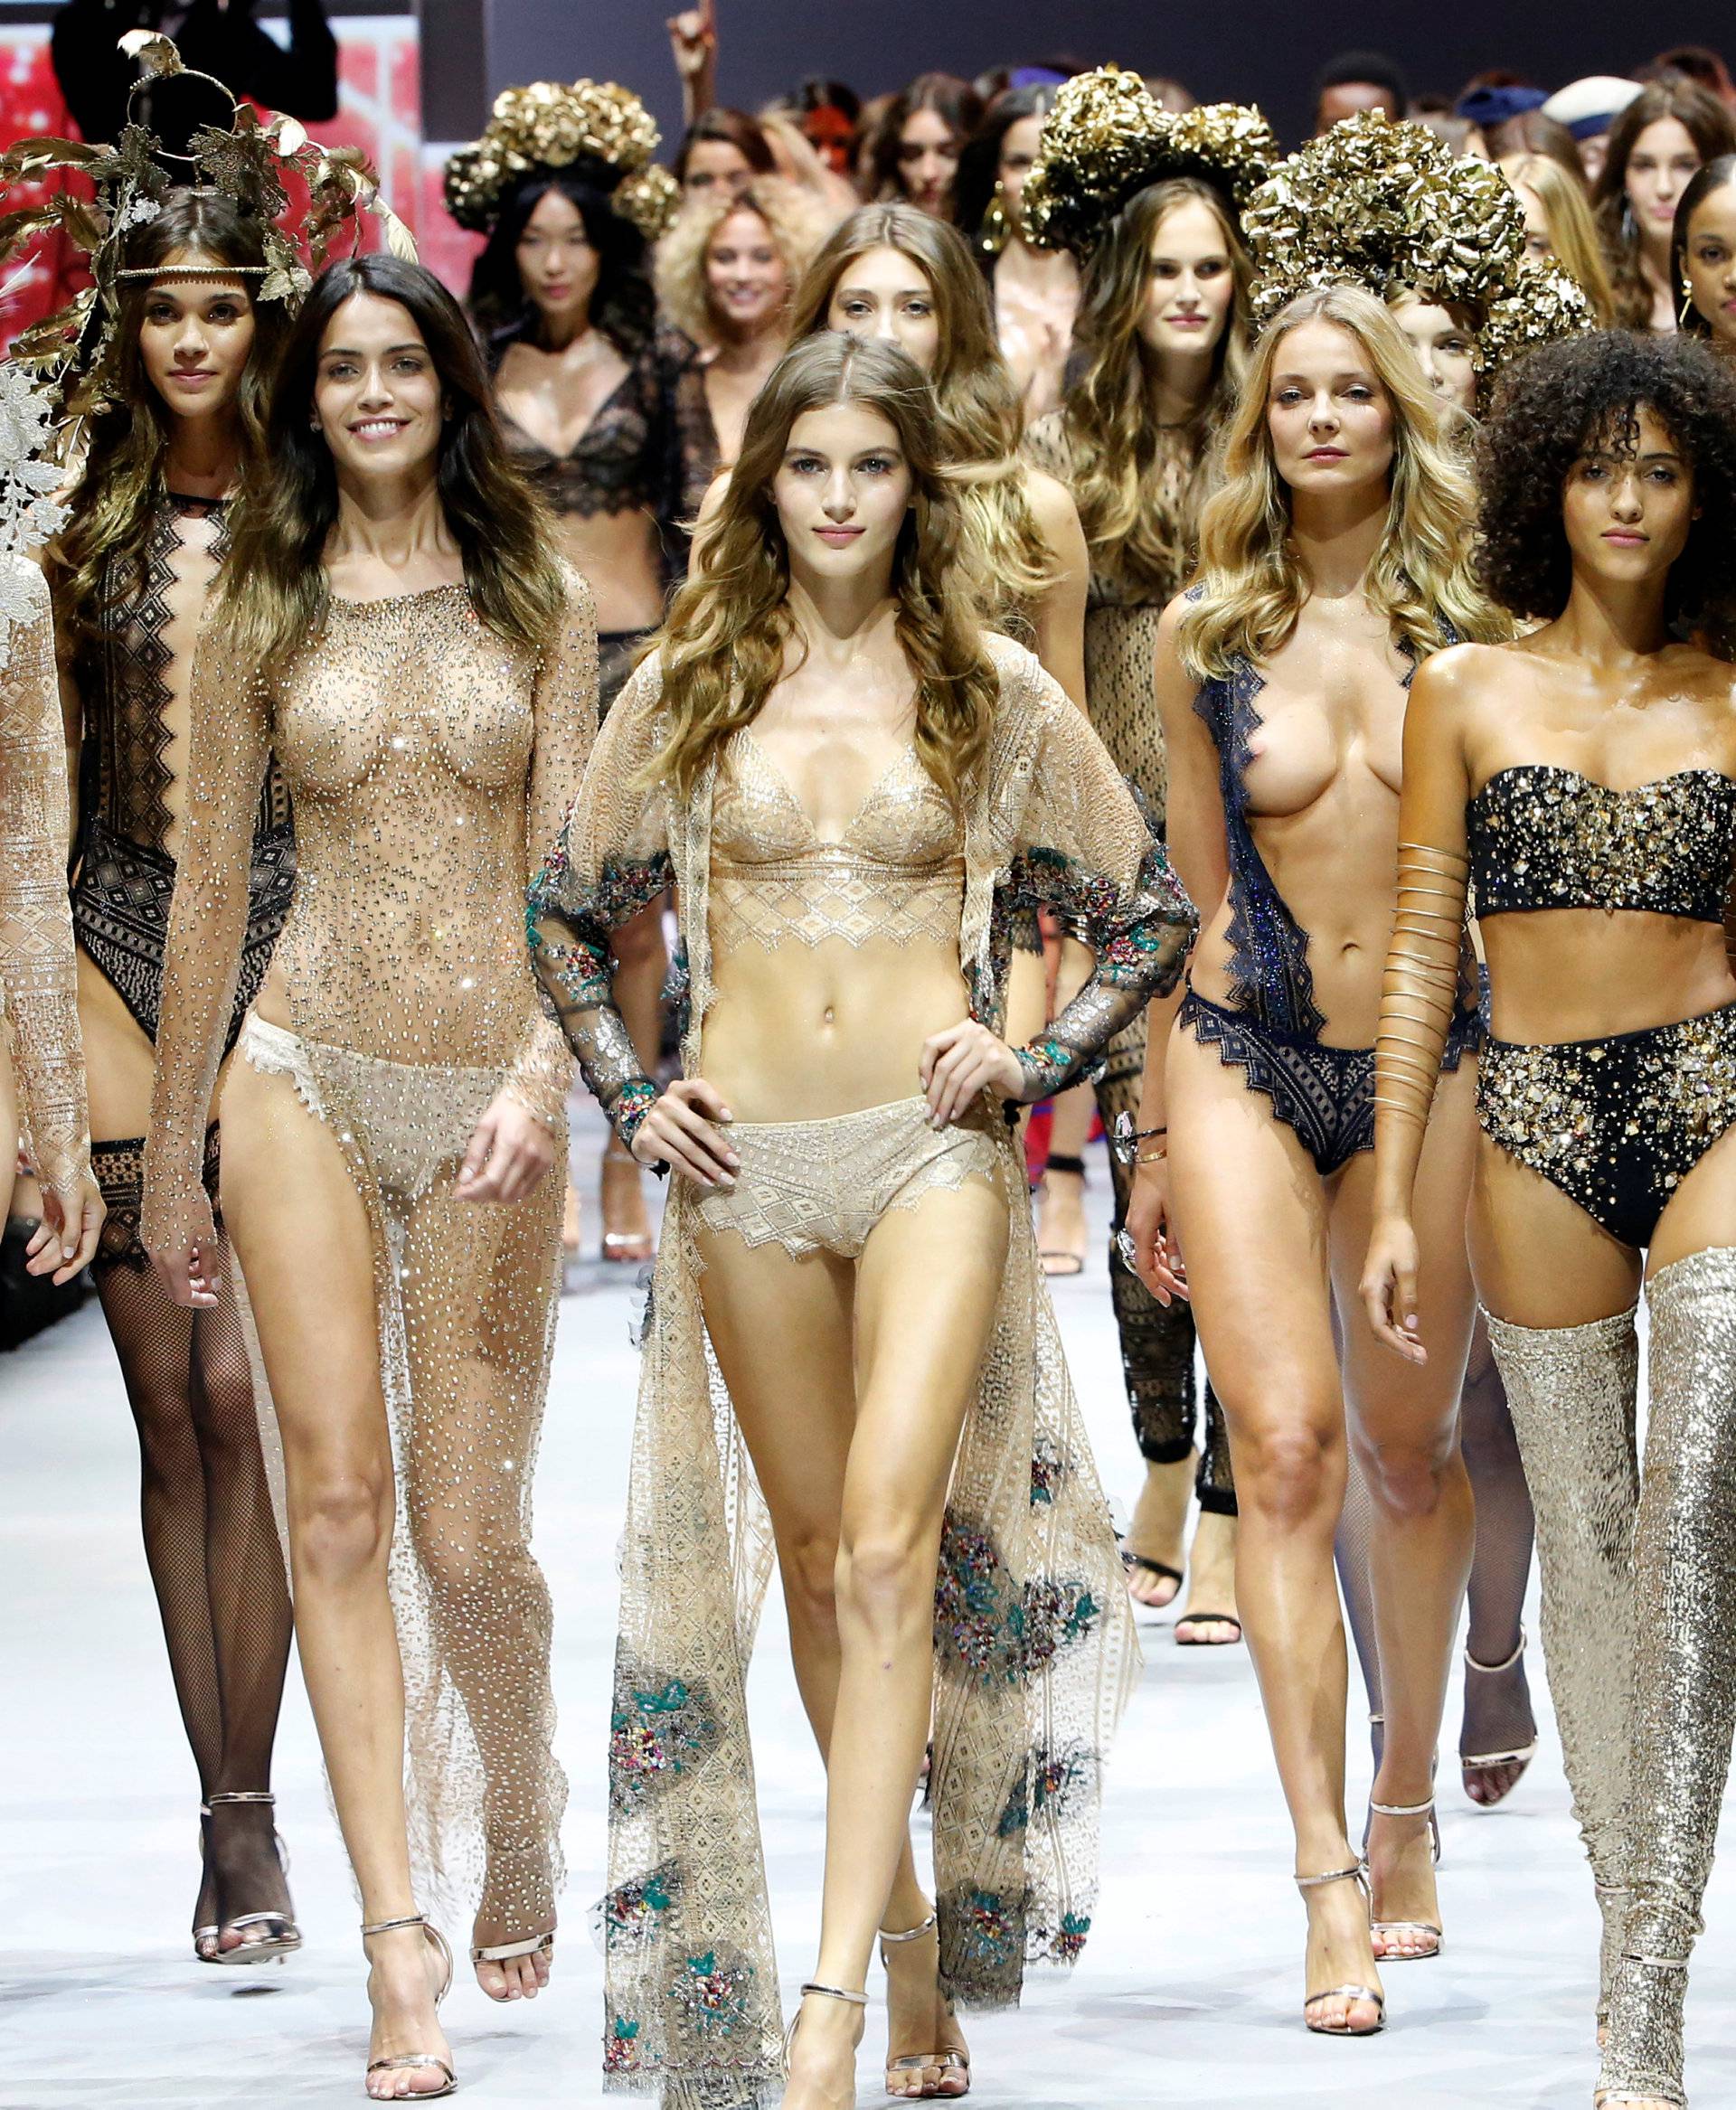 Models present creations during the Etam Live Show Lingerie at the Fashion Week in Paris, France